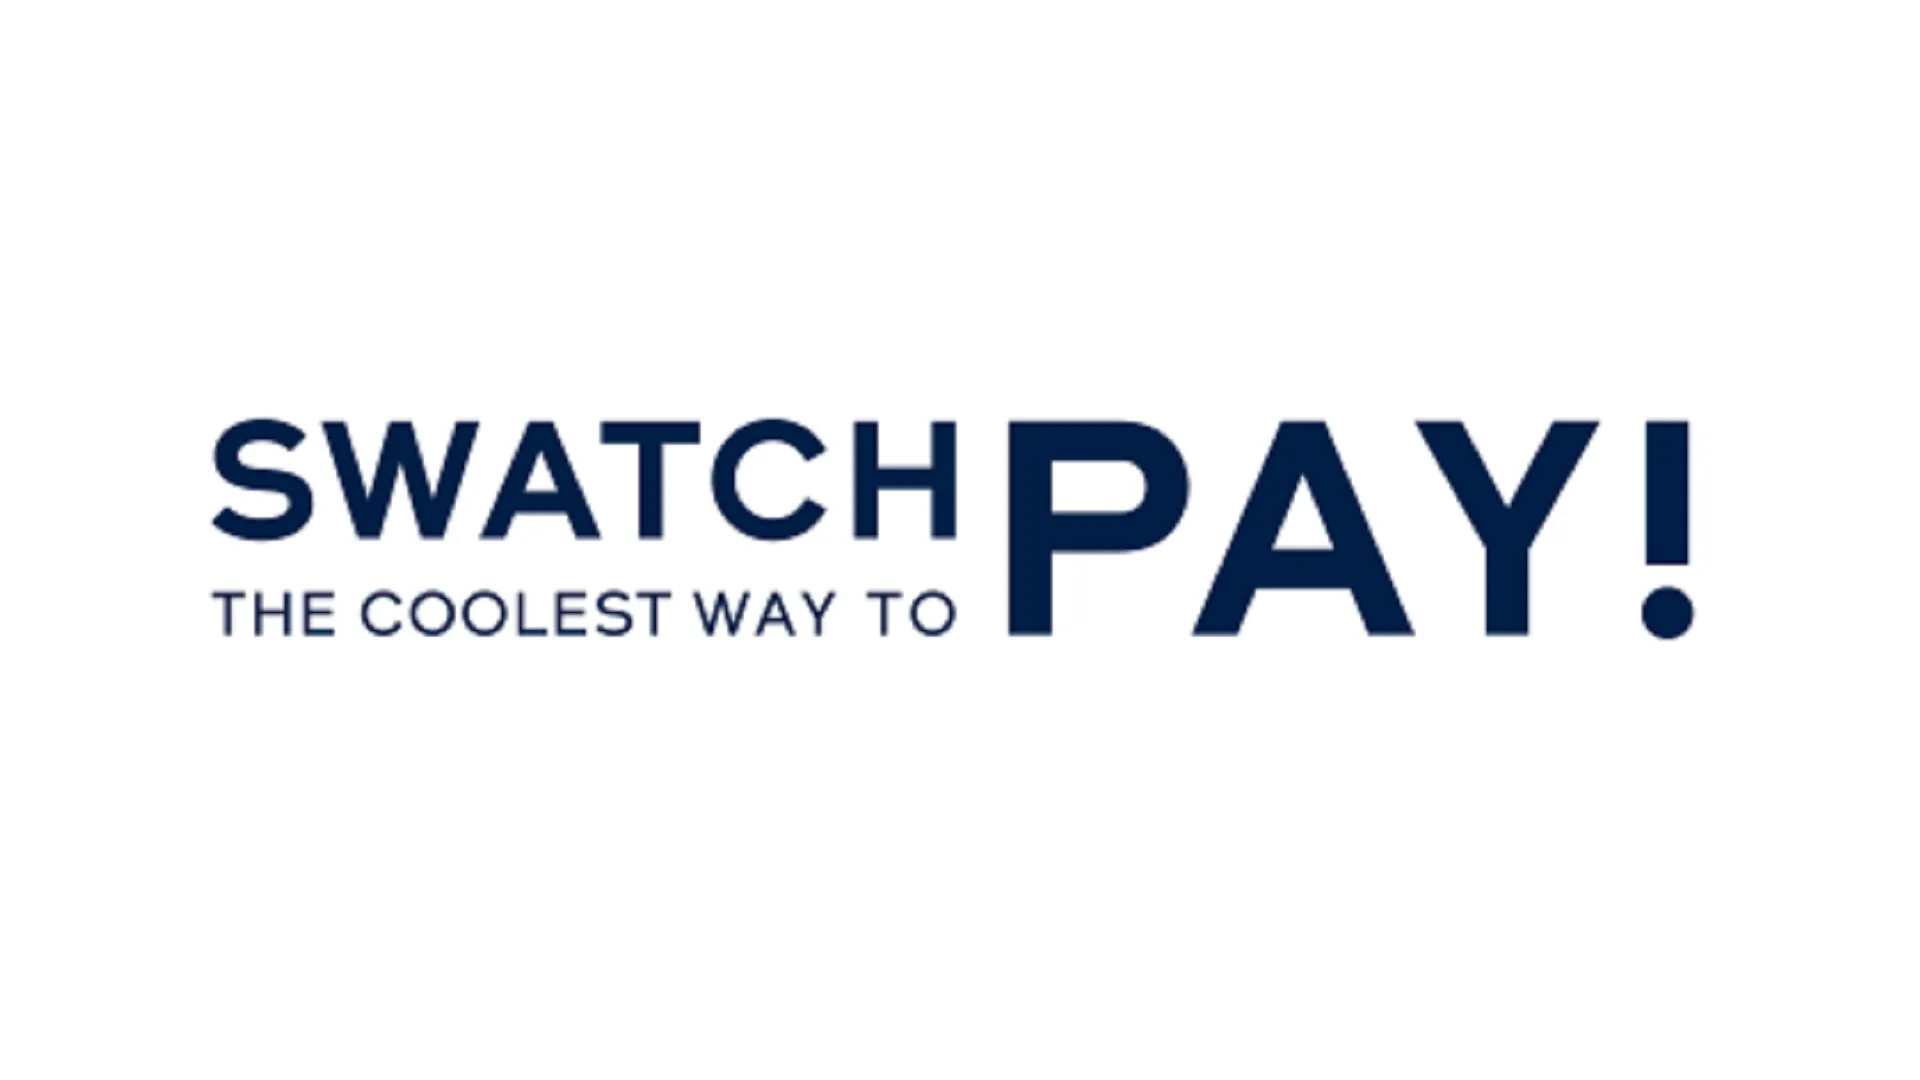 A banner image logo of Swatch Pay.